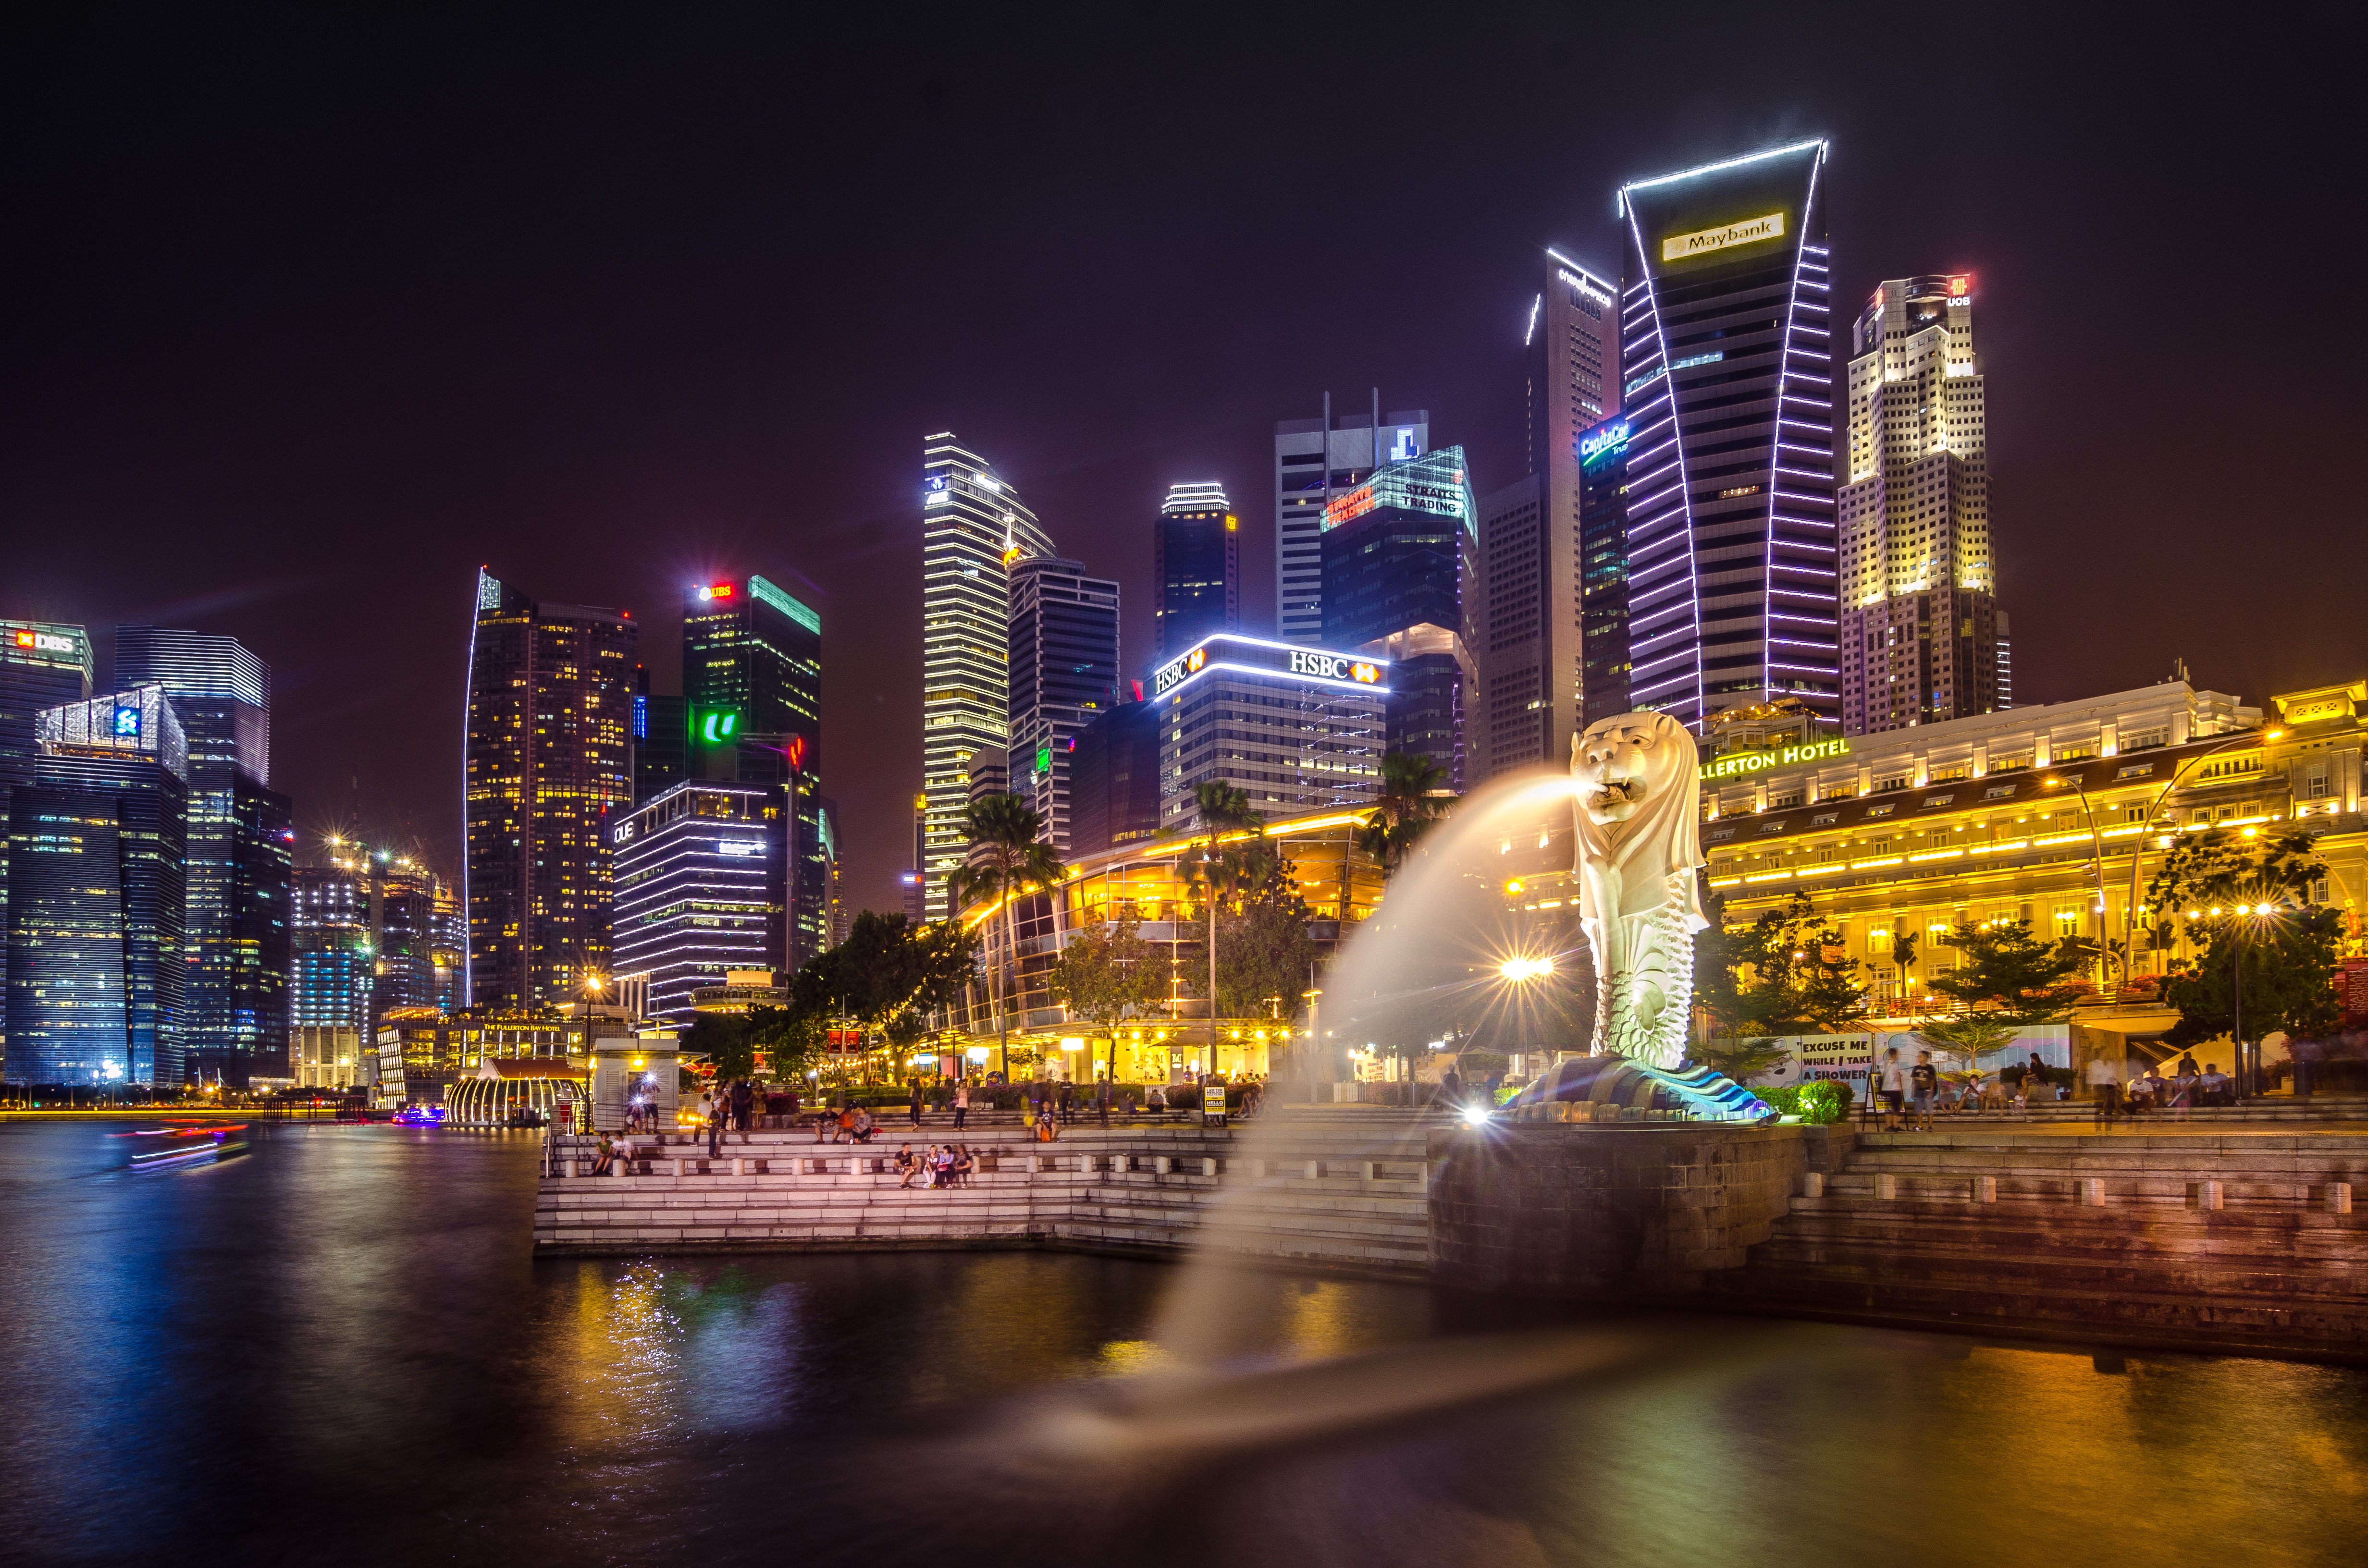 Top attractions to see in Singapore for every traveler